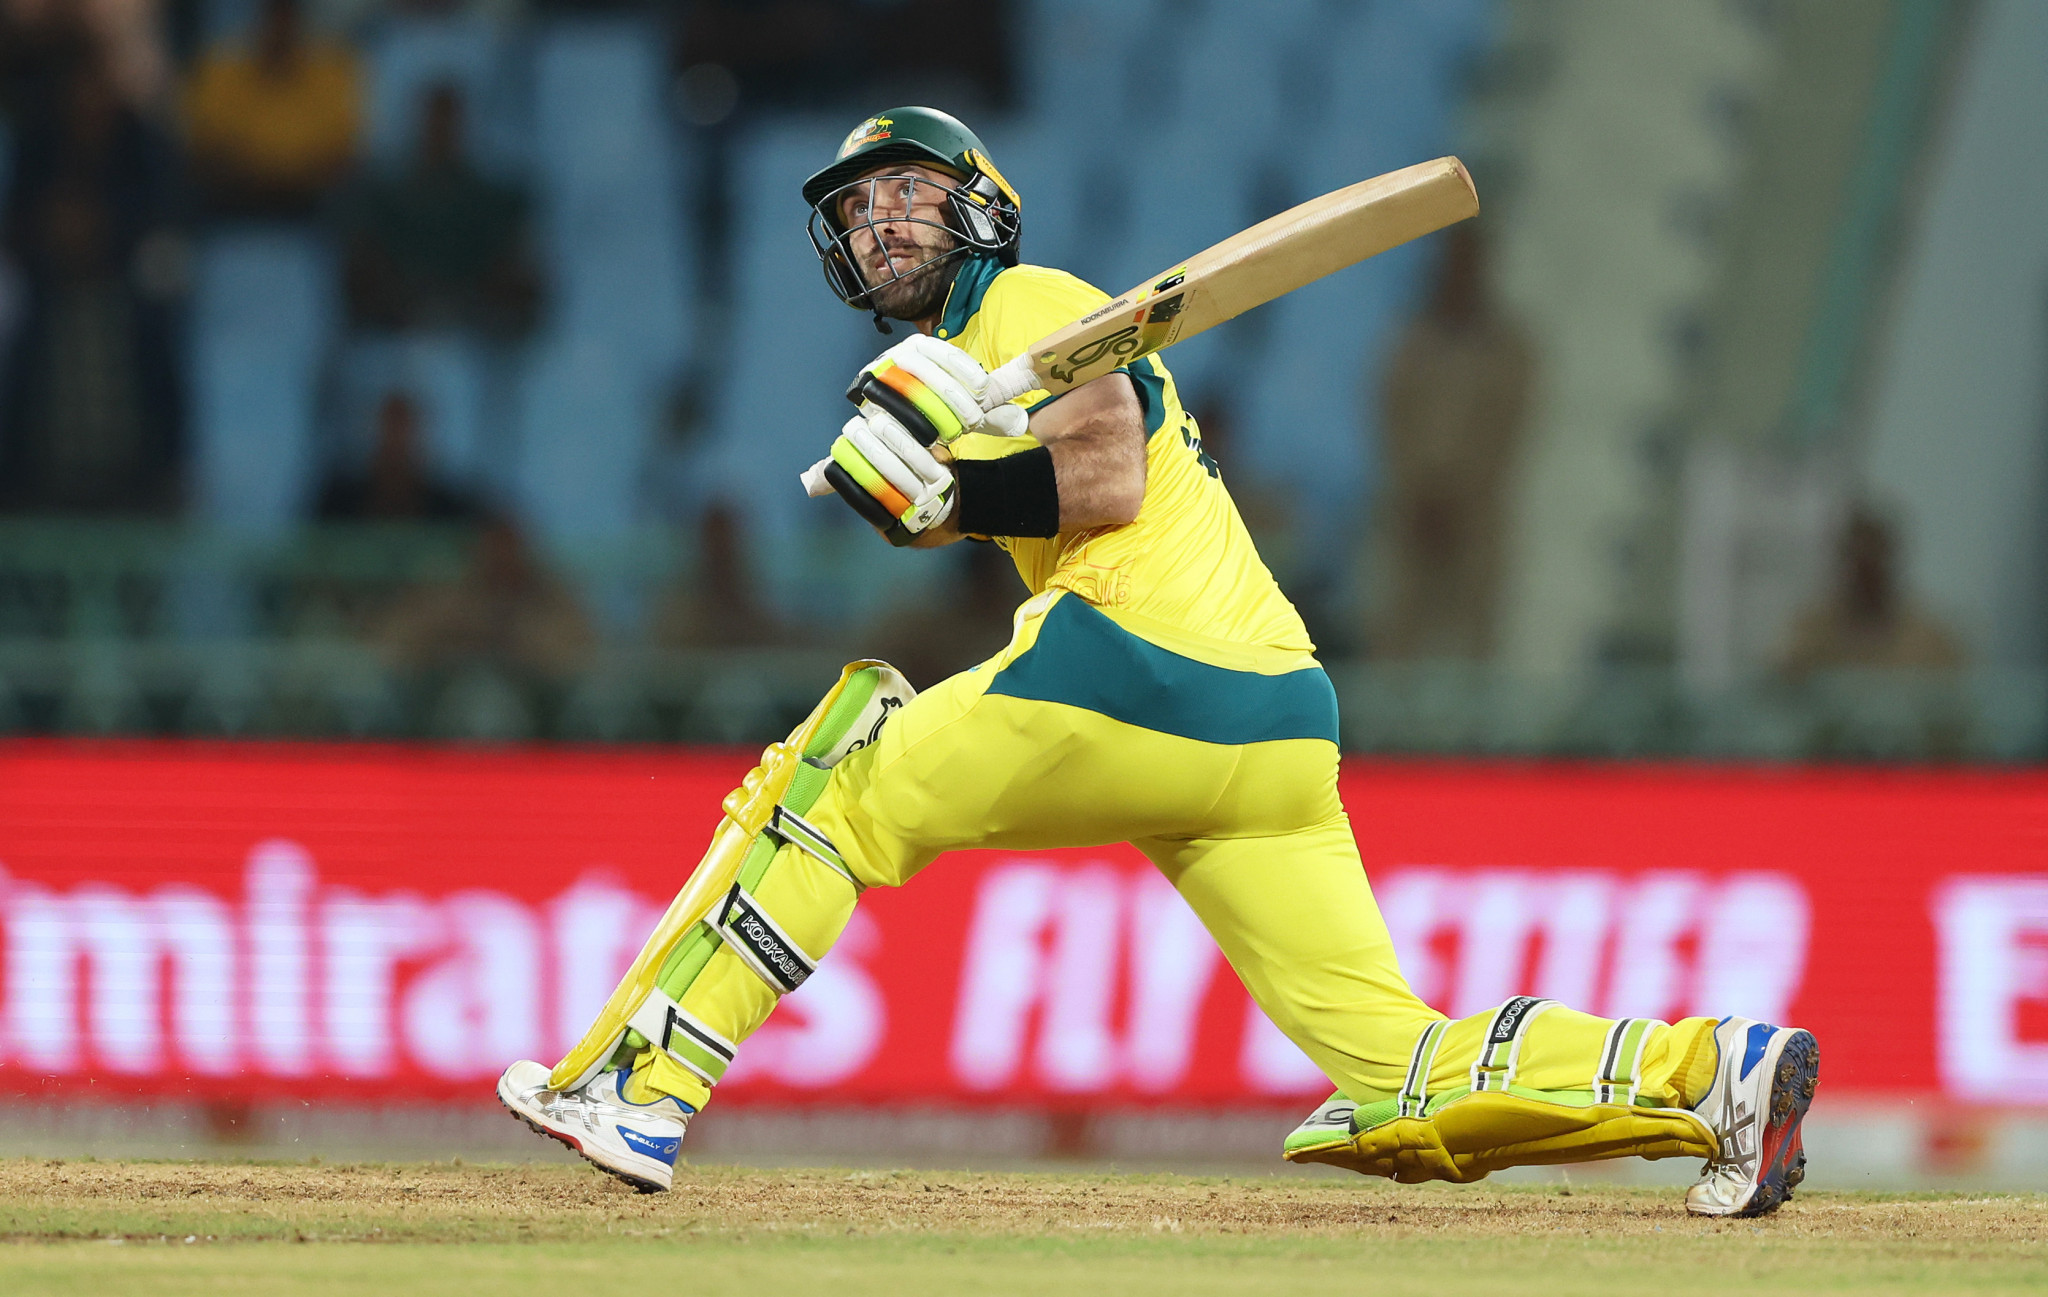 Australia earn their first win of Cricket World Cup after Sri Lanka batting collapse